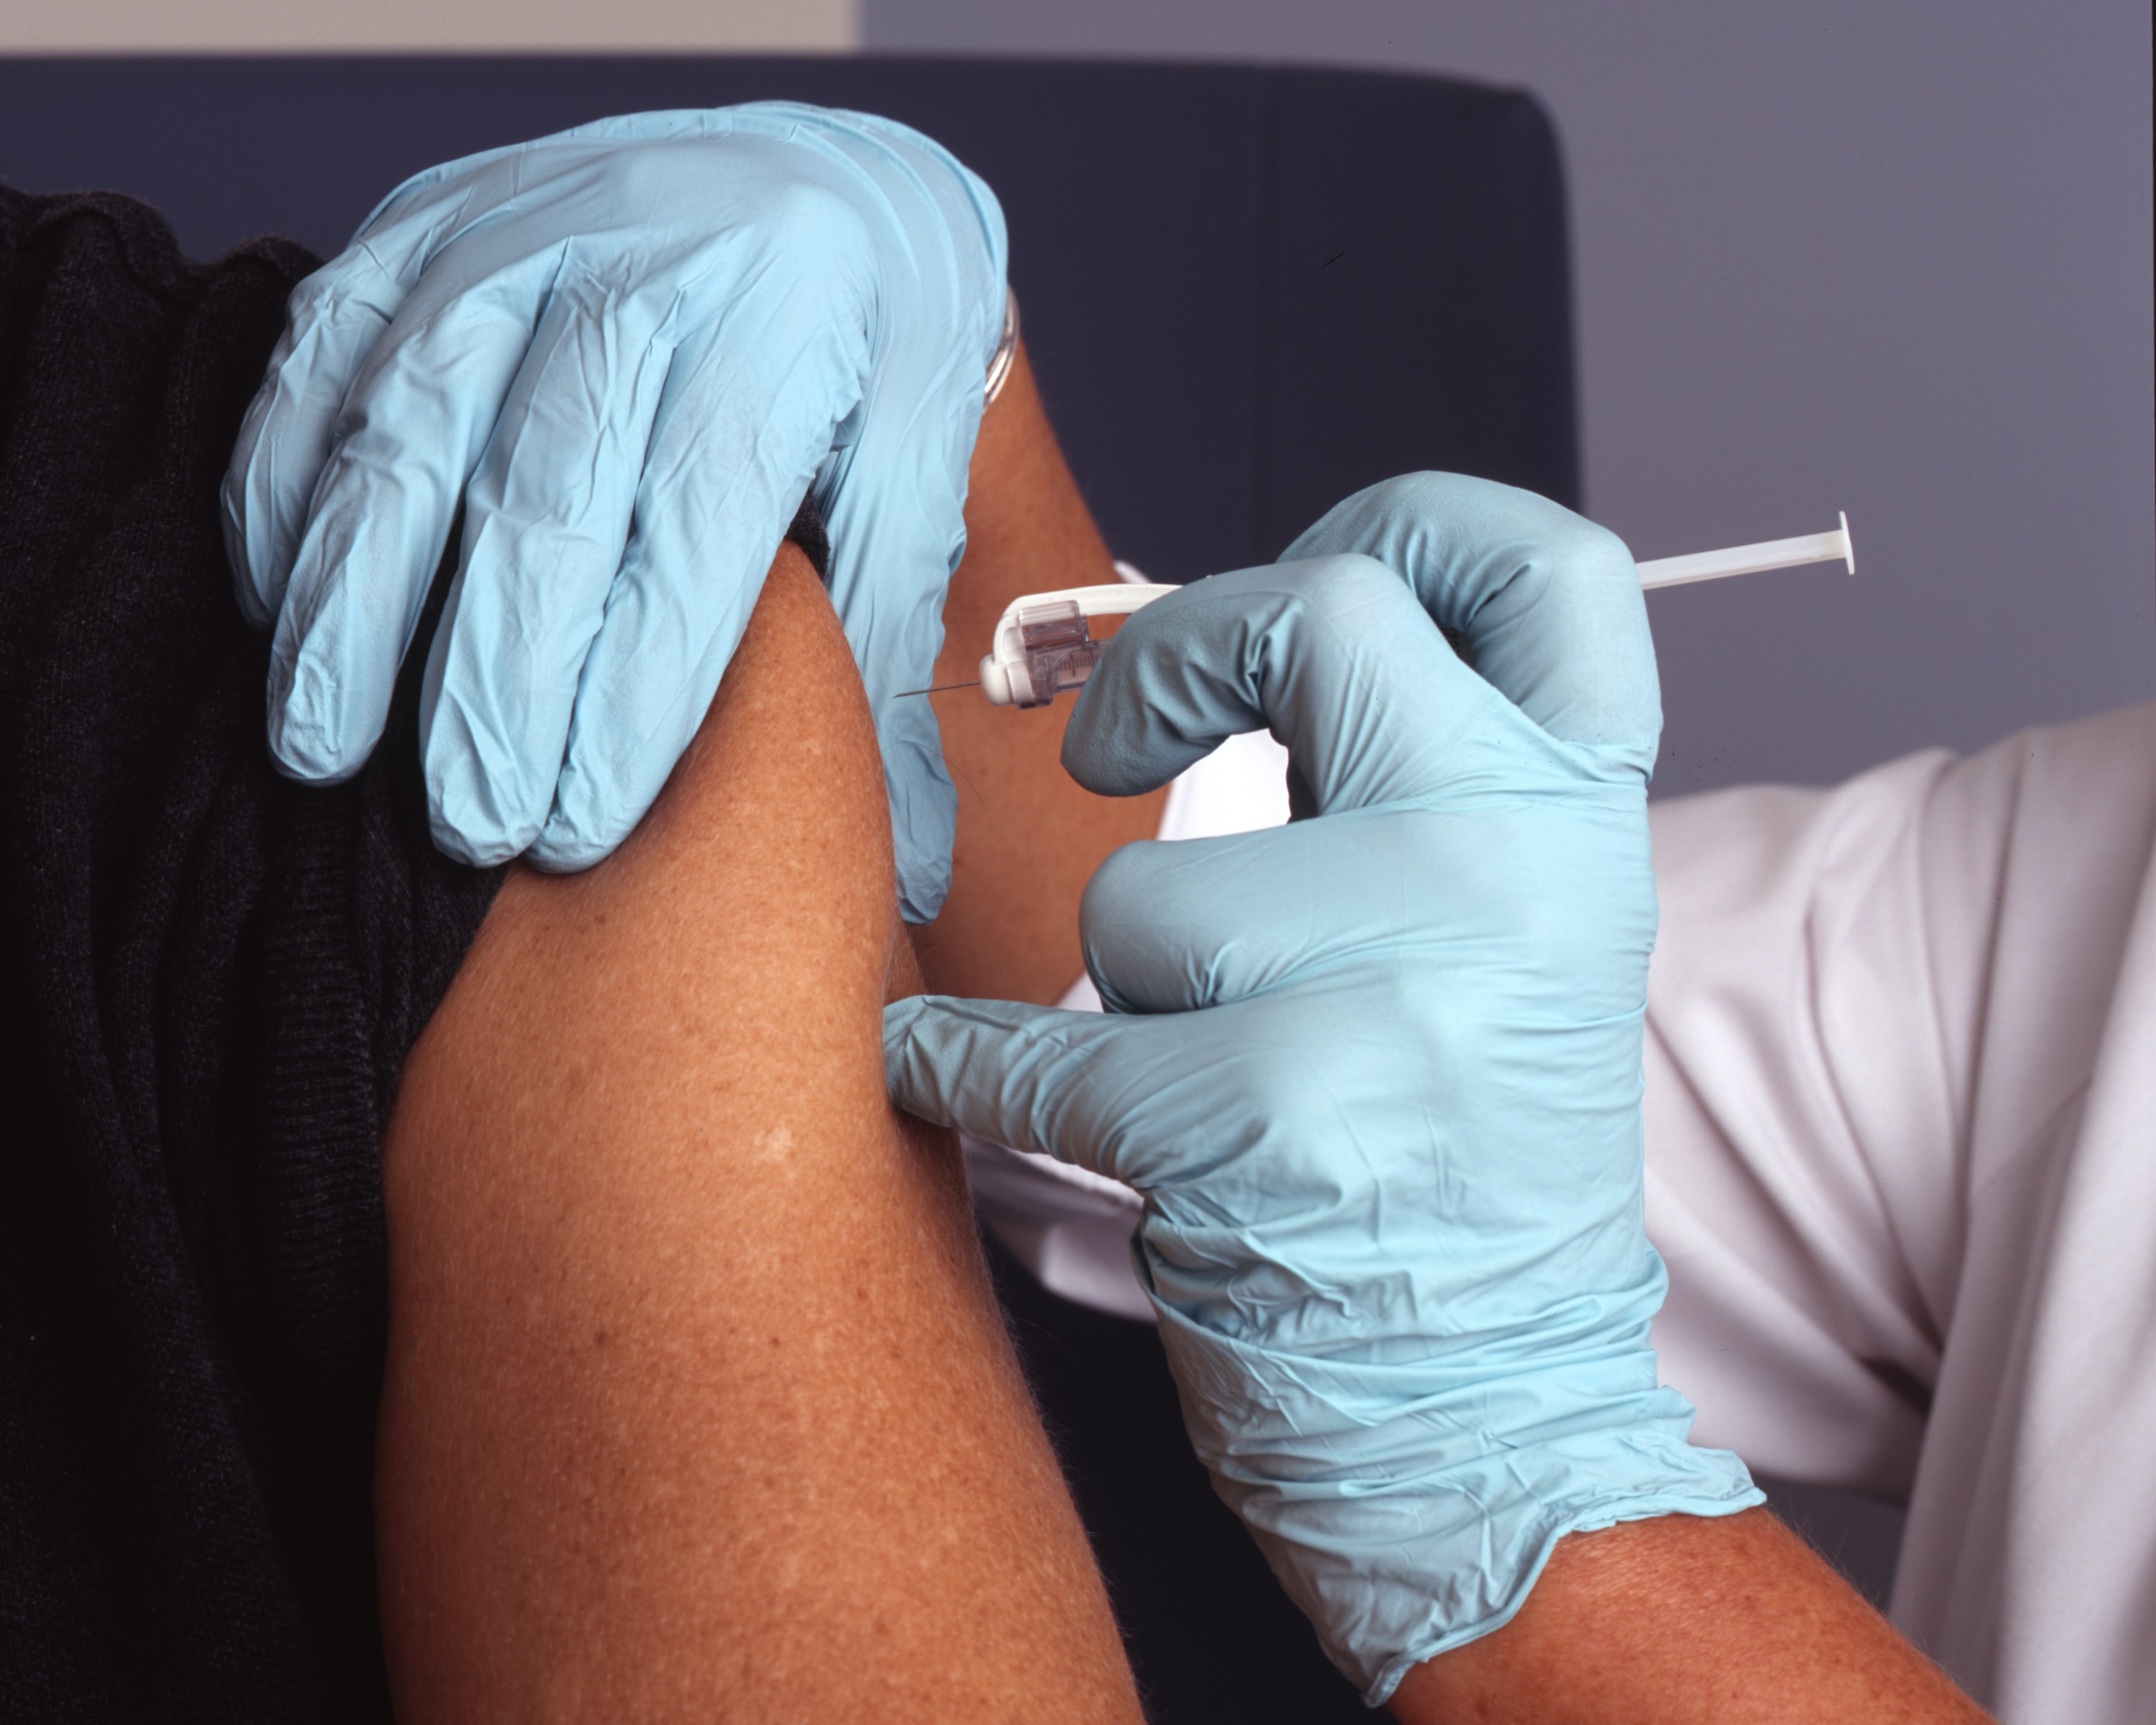 BREAKING: Rate Cut Bets Melt as Vaccines Boost Economy Hopes